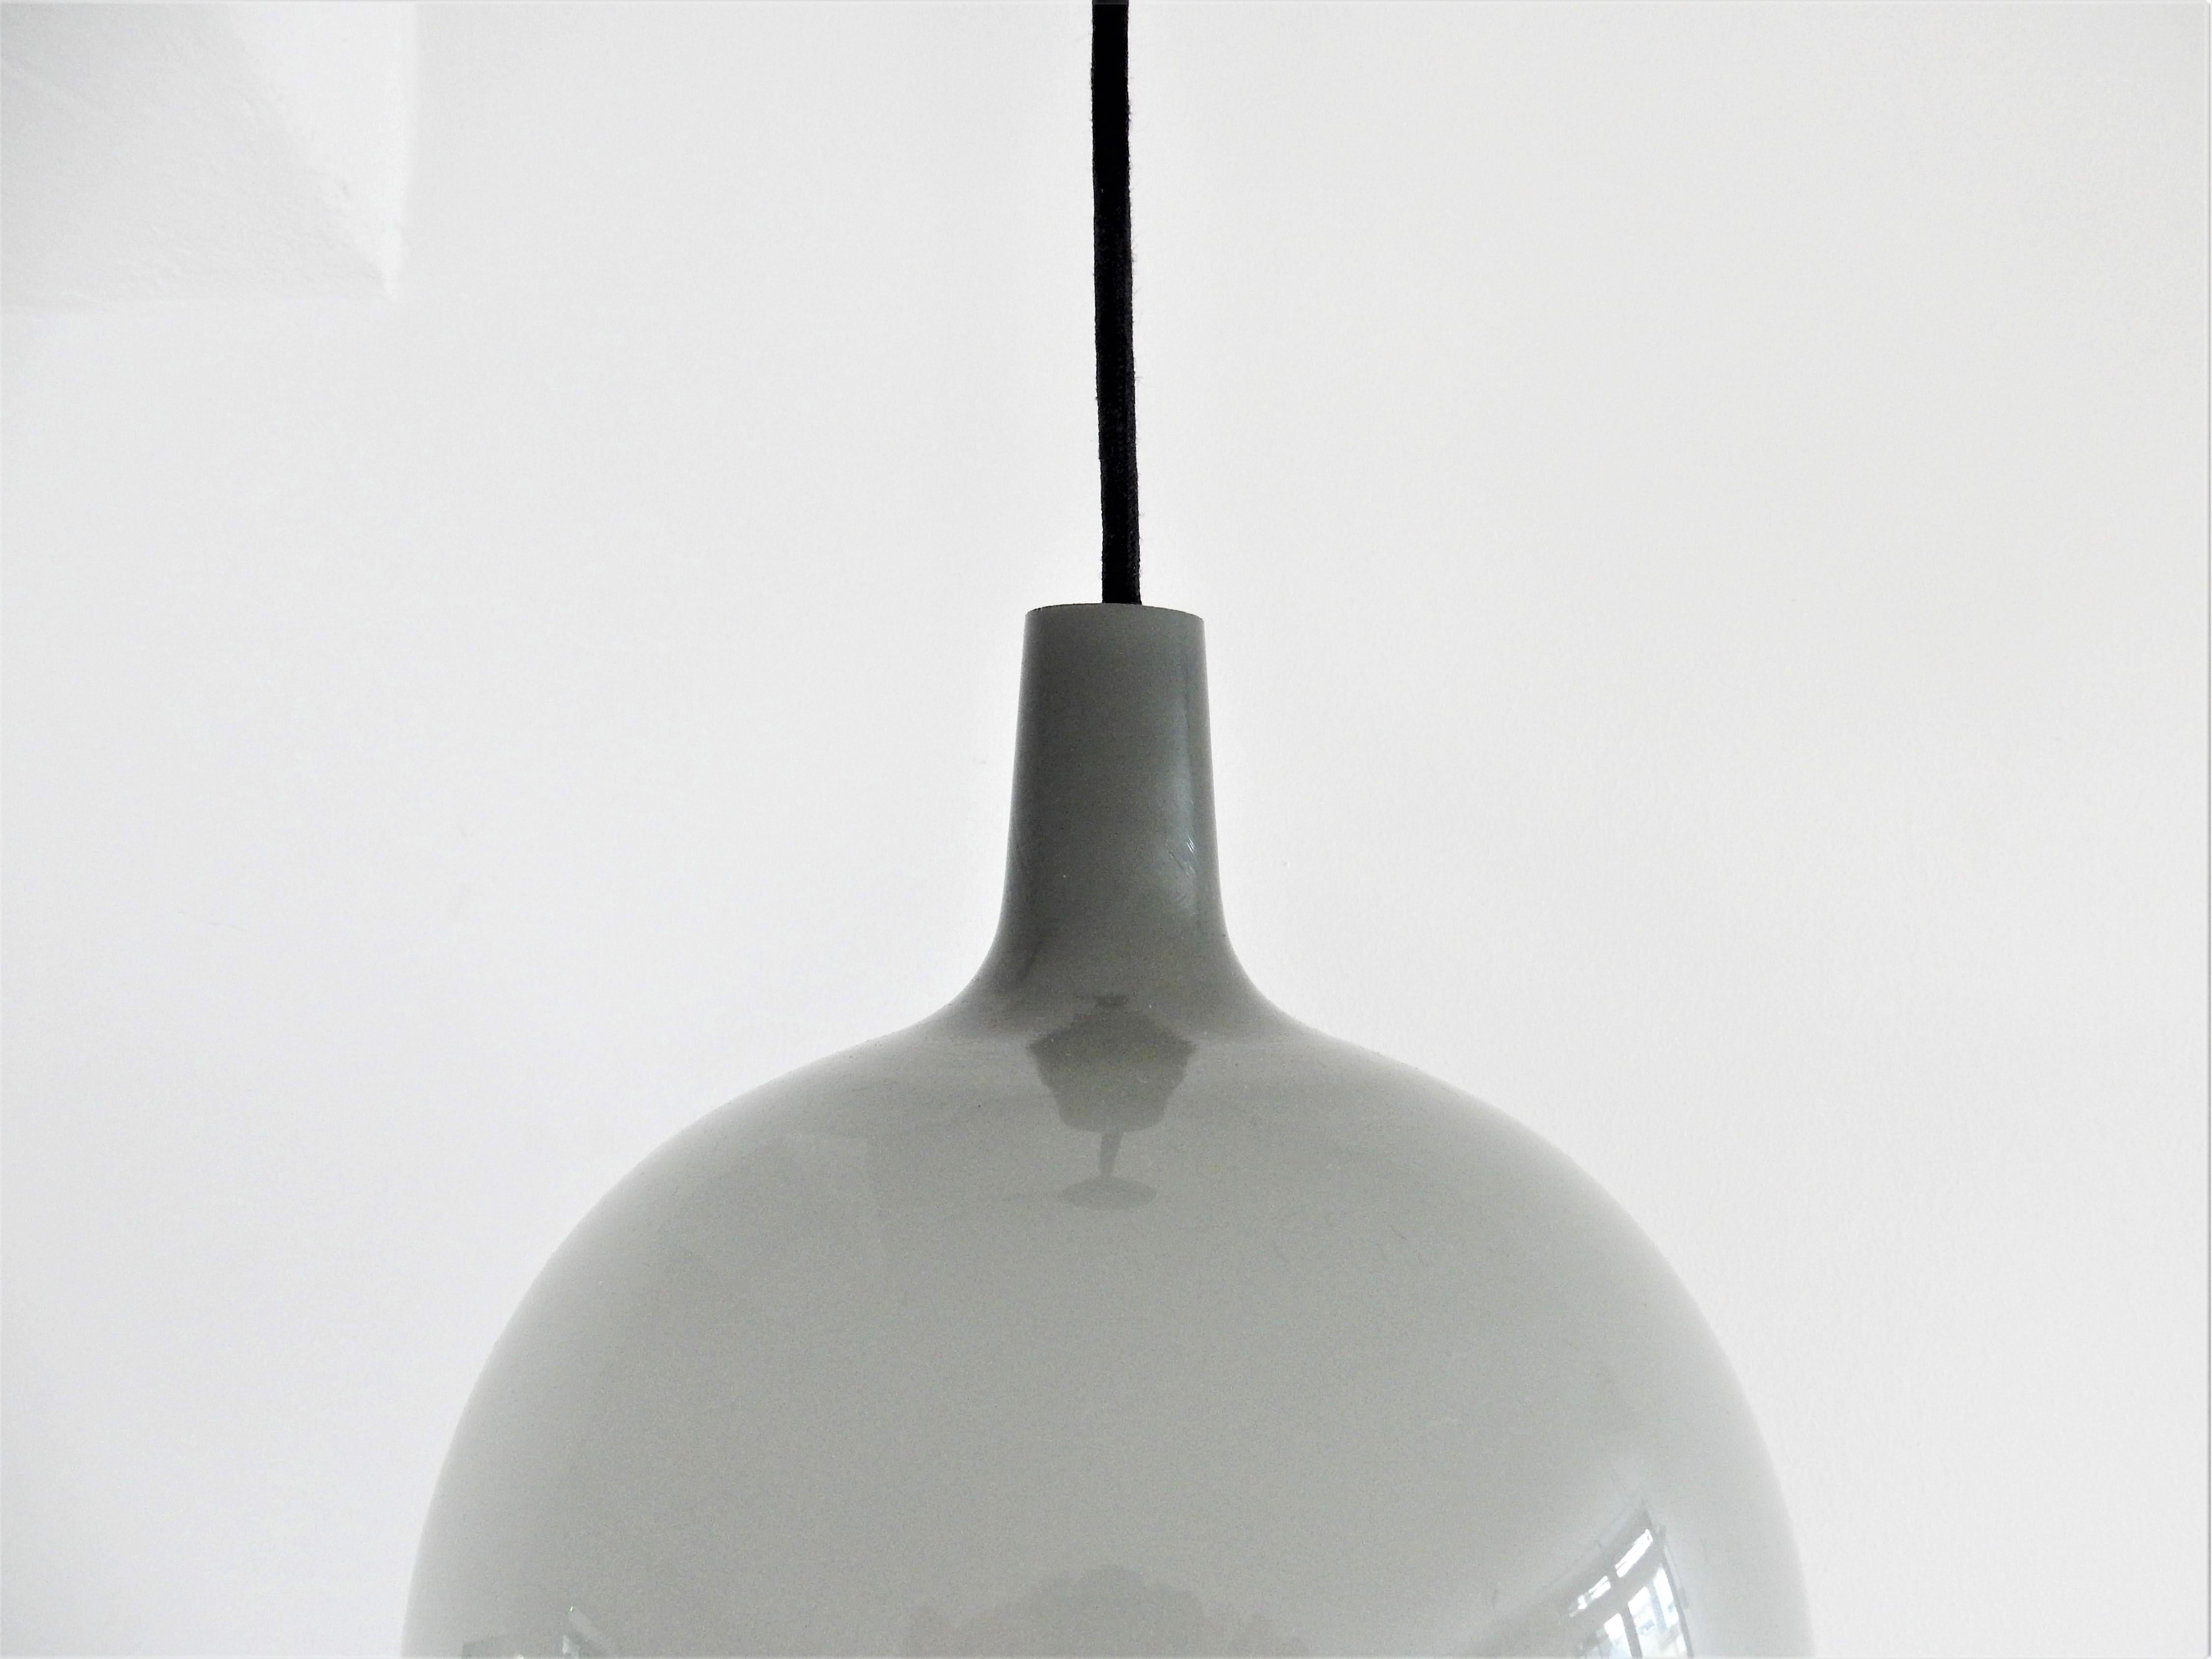 The Pompei pendant lamp was designed by Jo Hammerborg in 1963 for Fog & Mørup. Holmegaard produced the glass for this lamp. This model was made in green, grey and orange glass with a white inside. This beautiful grey variant is in a very good